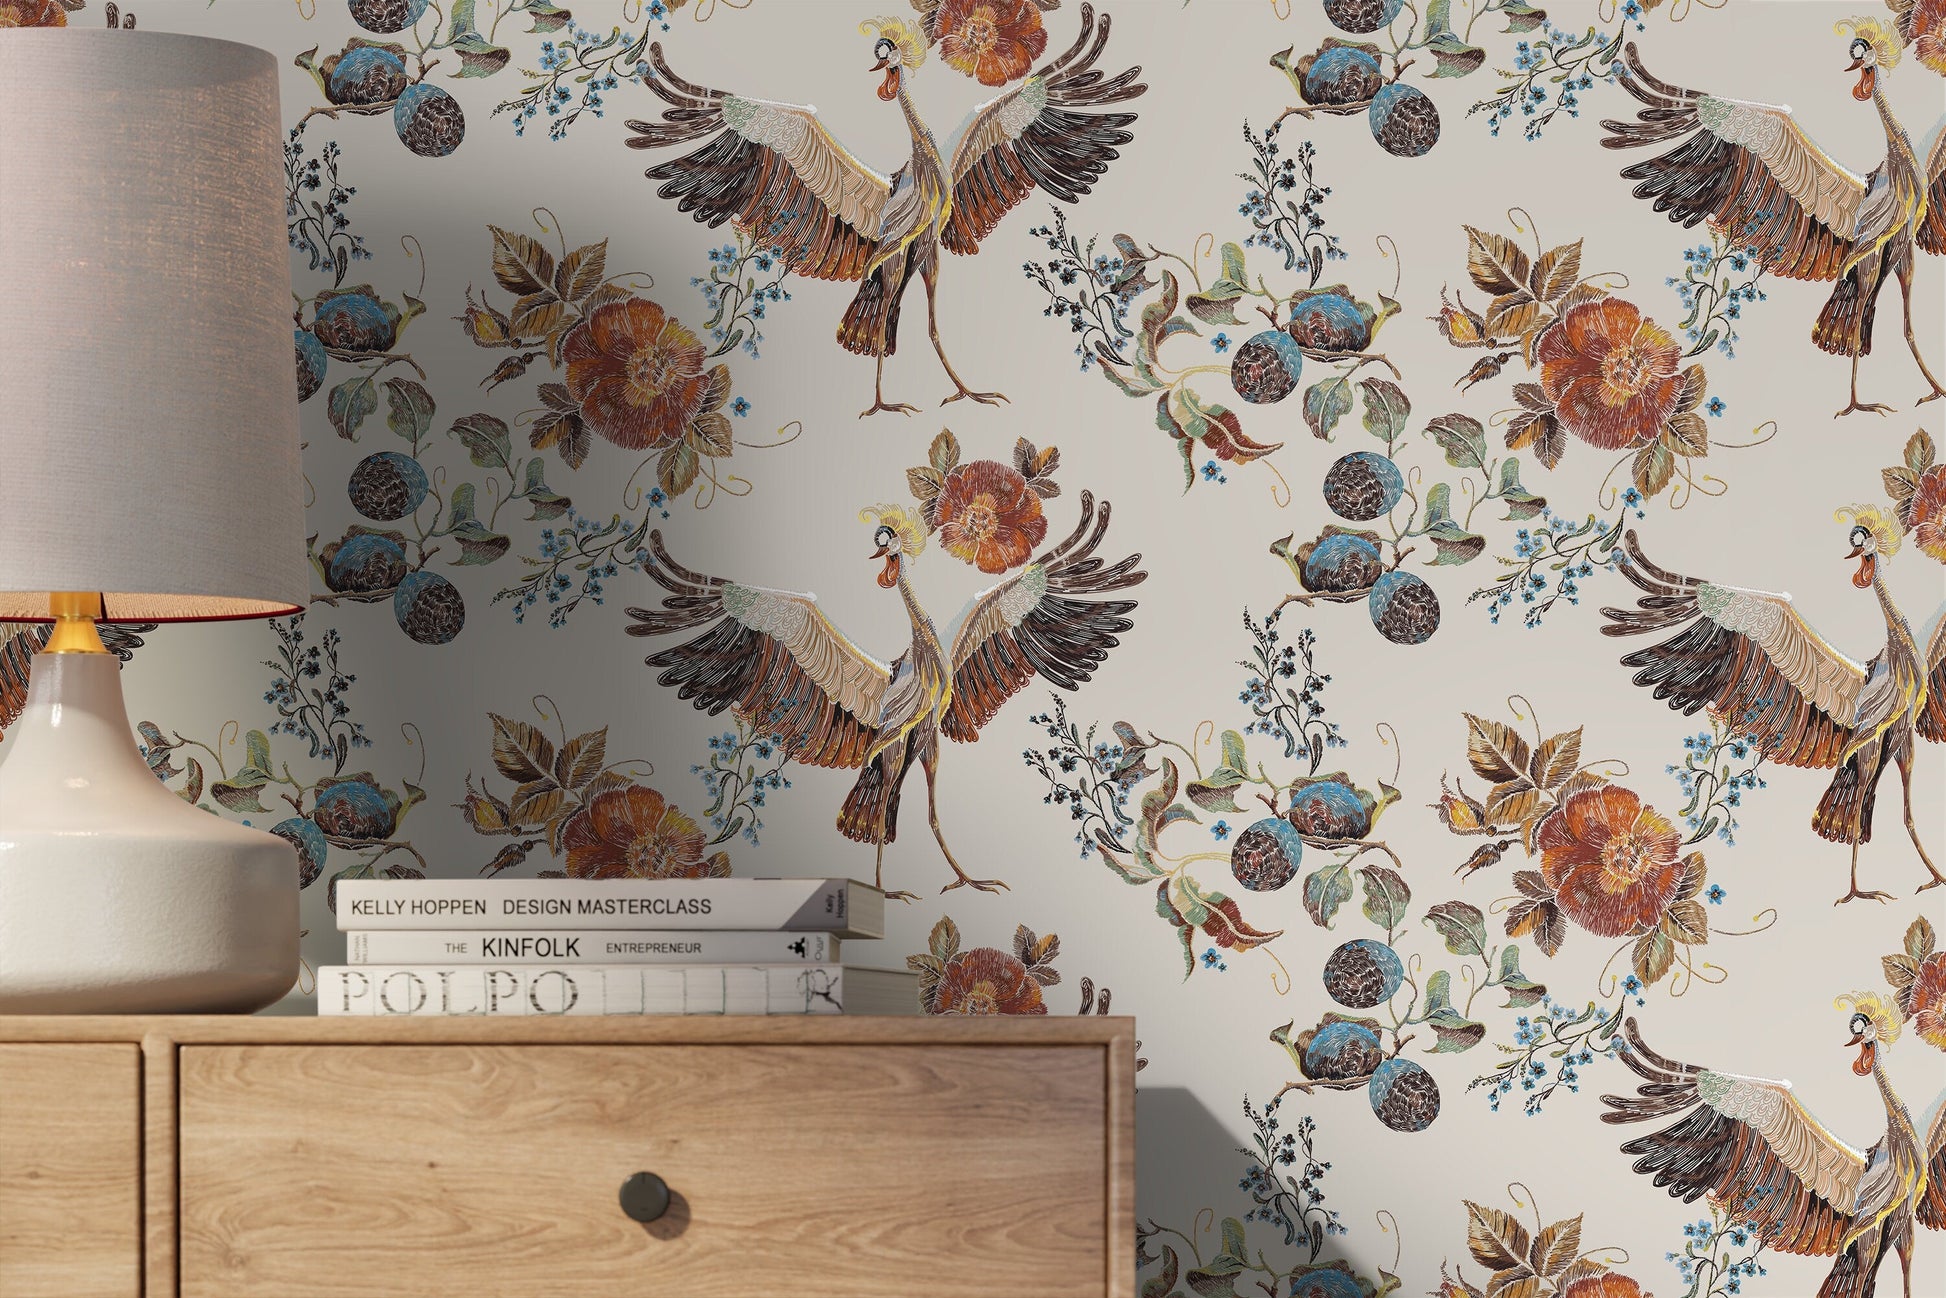 Vintage Floral and Bird Wallpaper / Peel and Stick Wallpaper Removable Wallpaper Home Decor Wall Art Wall Decor Room Decor - D404